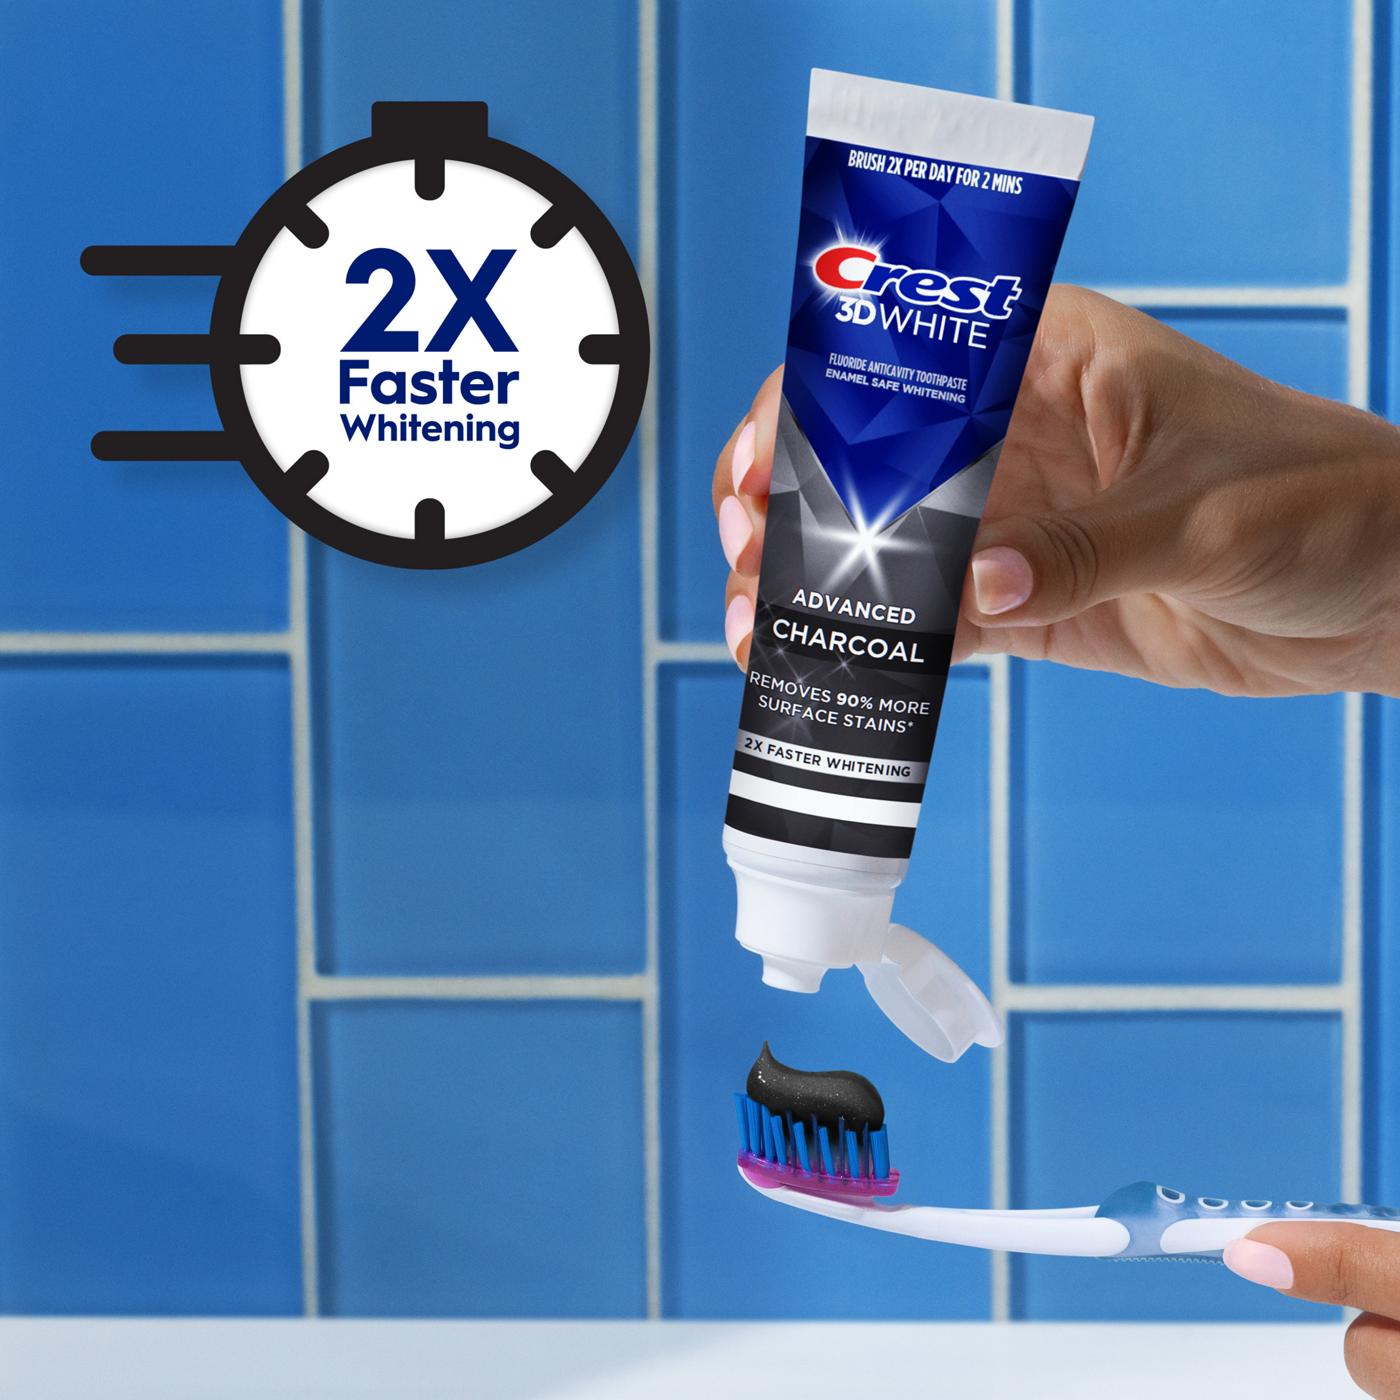 Crest 3D White Whitening Toothpaste - Charcoal; image 5 of 7